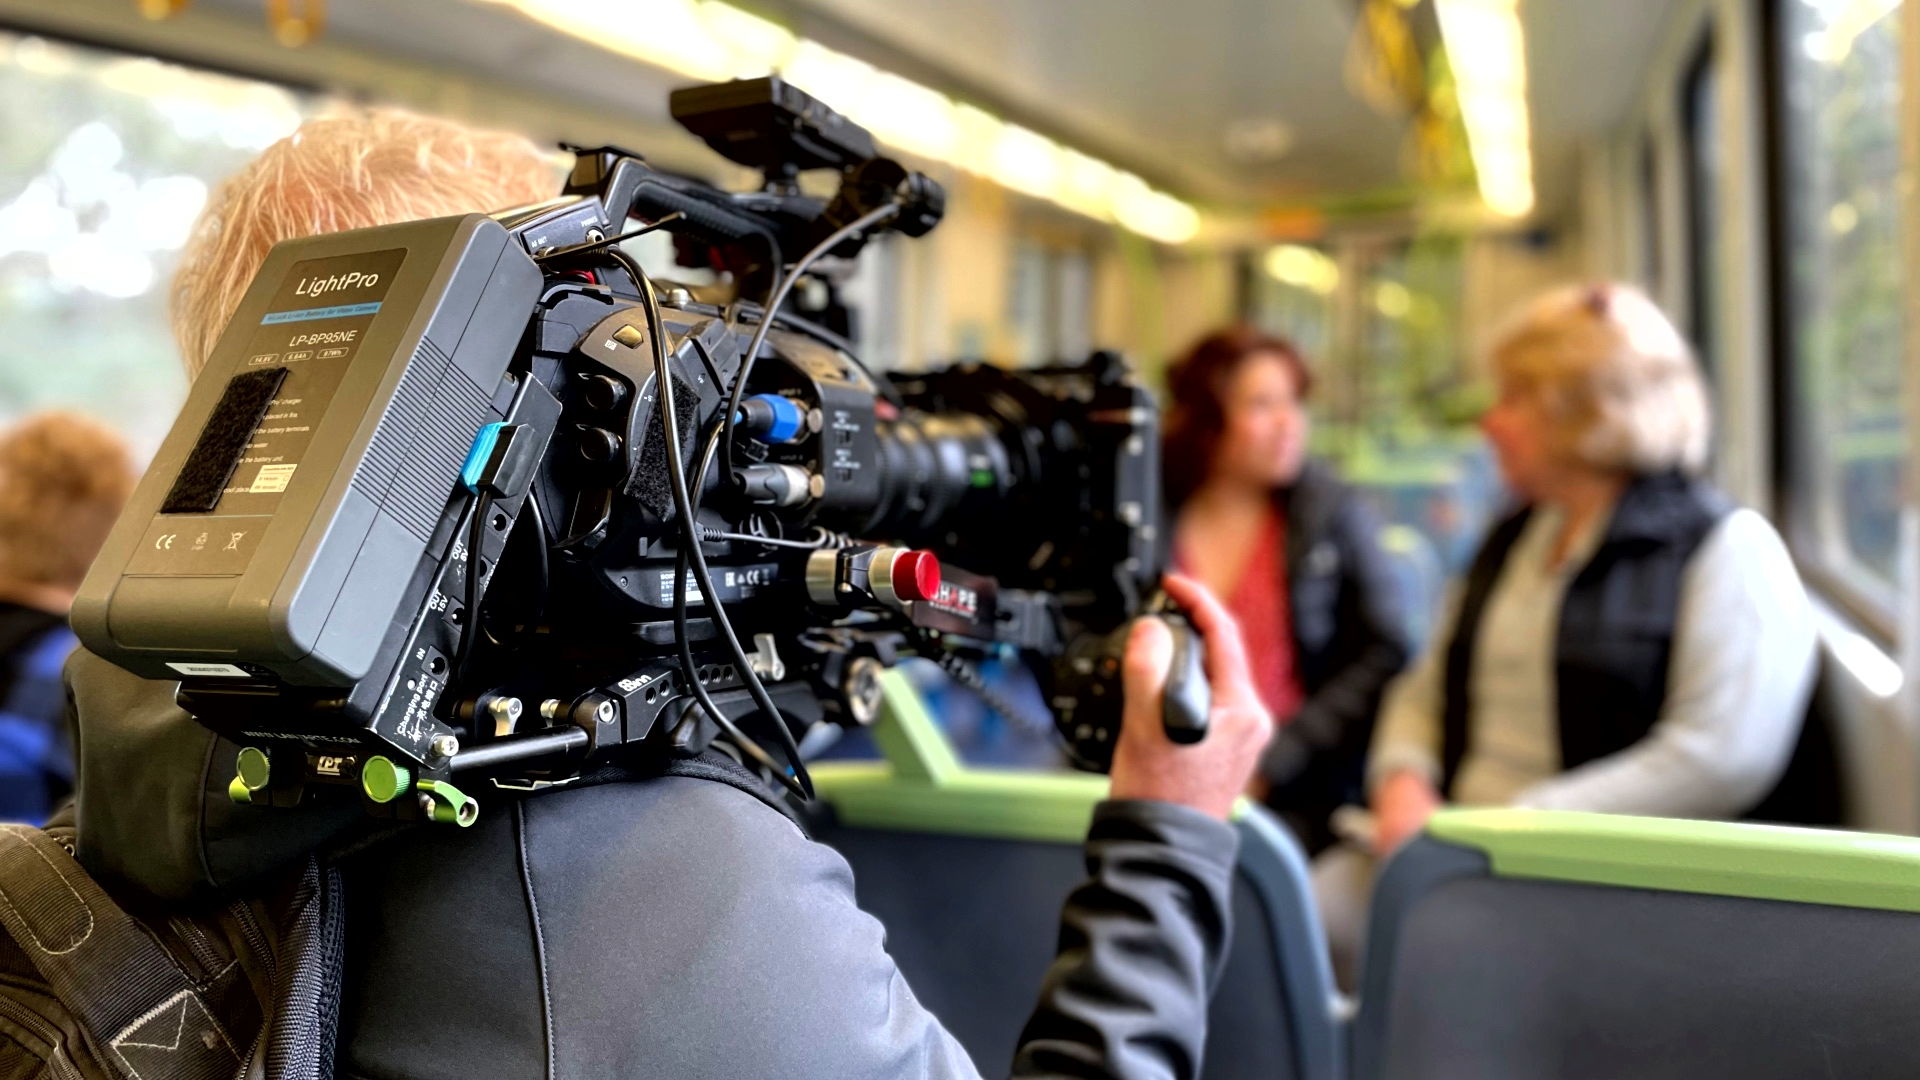 Video interview on a Melbourne train